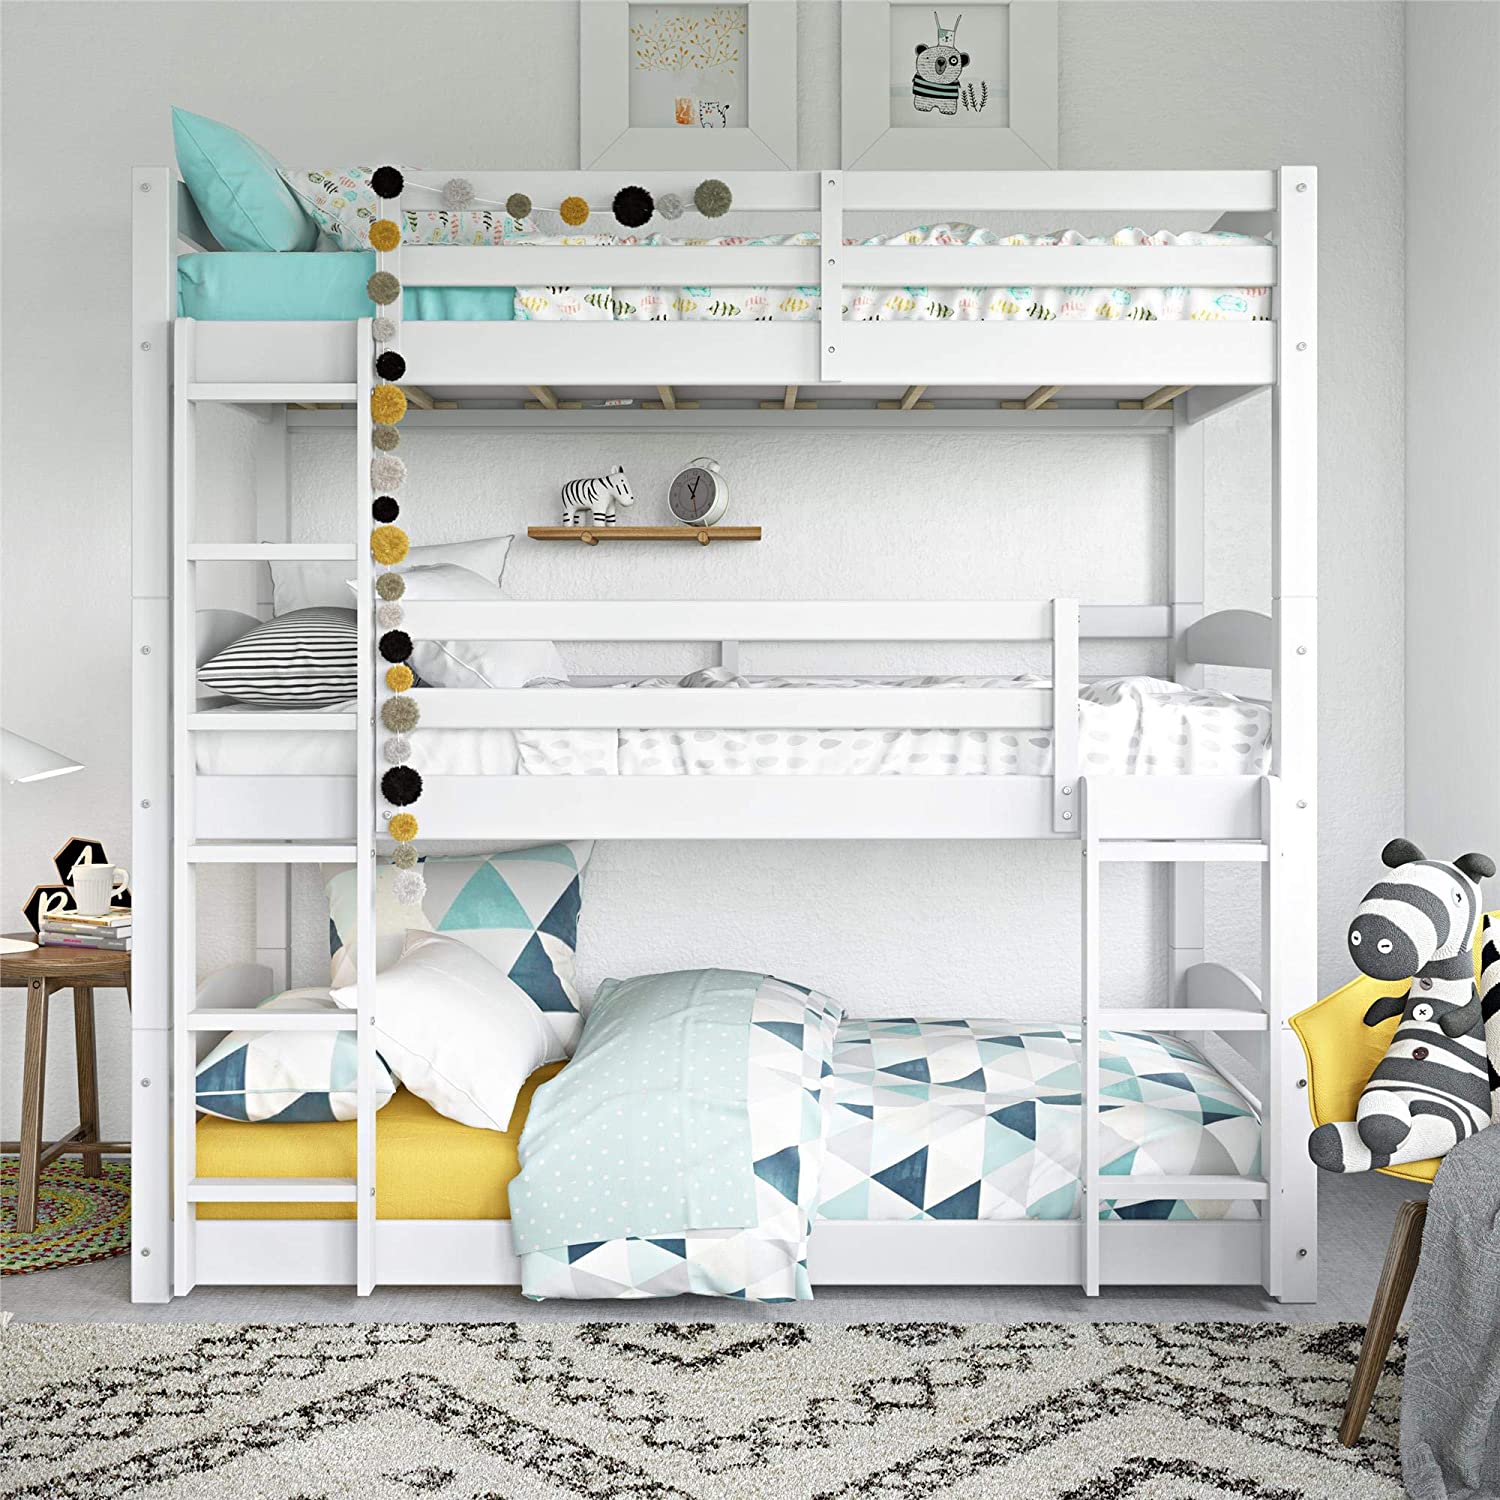 26 Bunk Beds You Ll Want For Yourself, Cute Bunk Beds